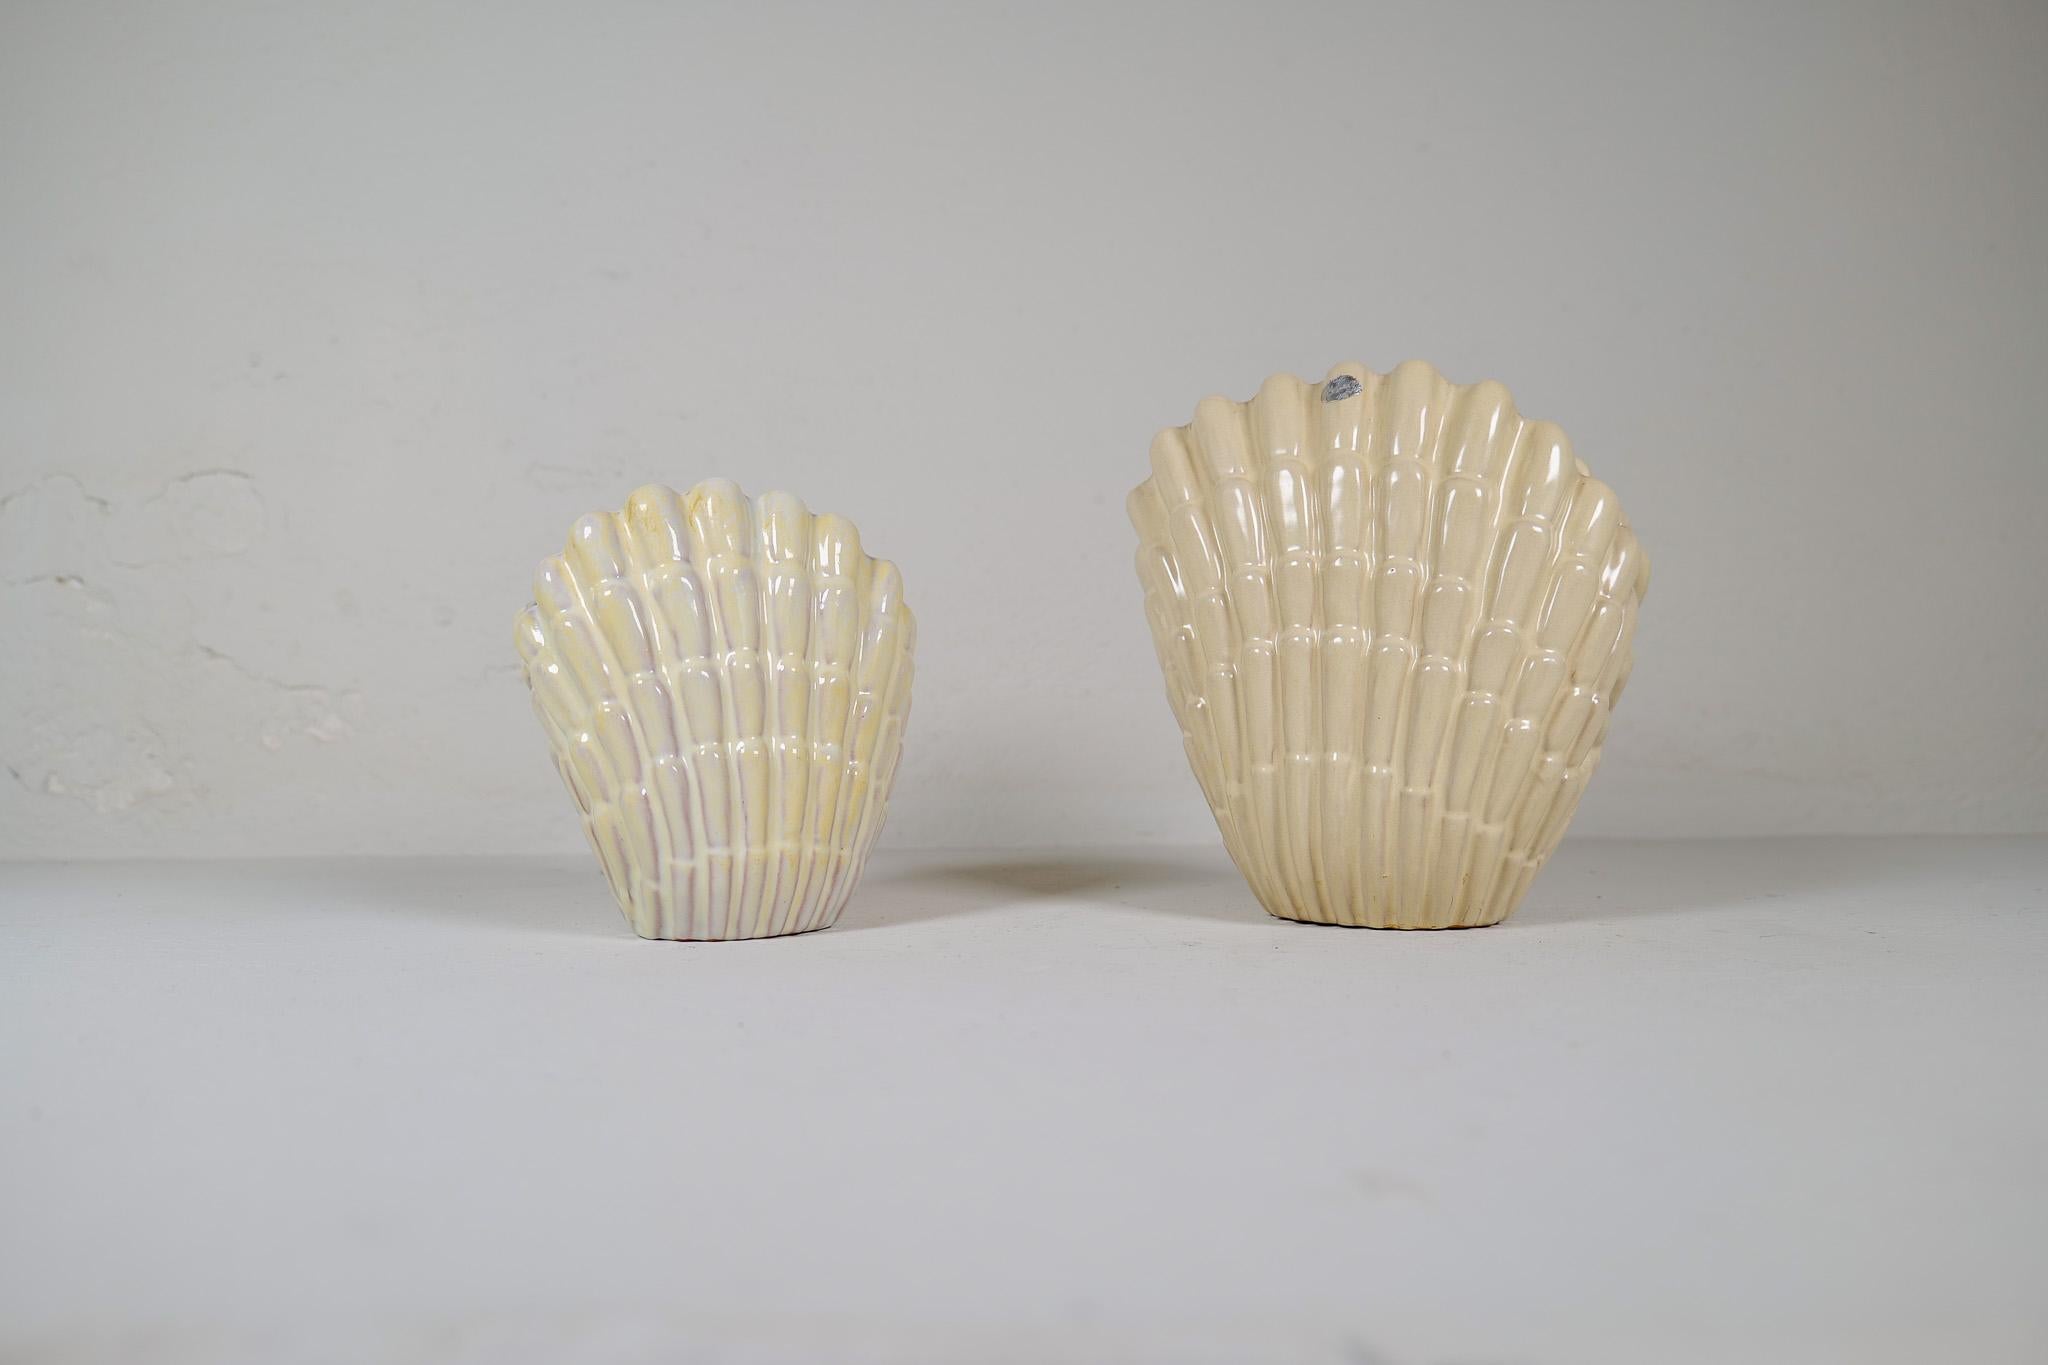 Swedish Midcentury Modern Pair of Seashell Vases by Vicke Lindstrand , Sweden For Sale